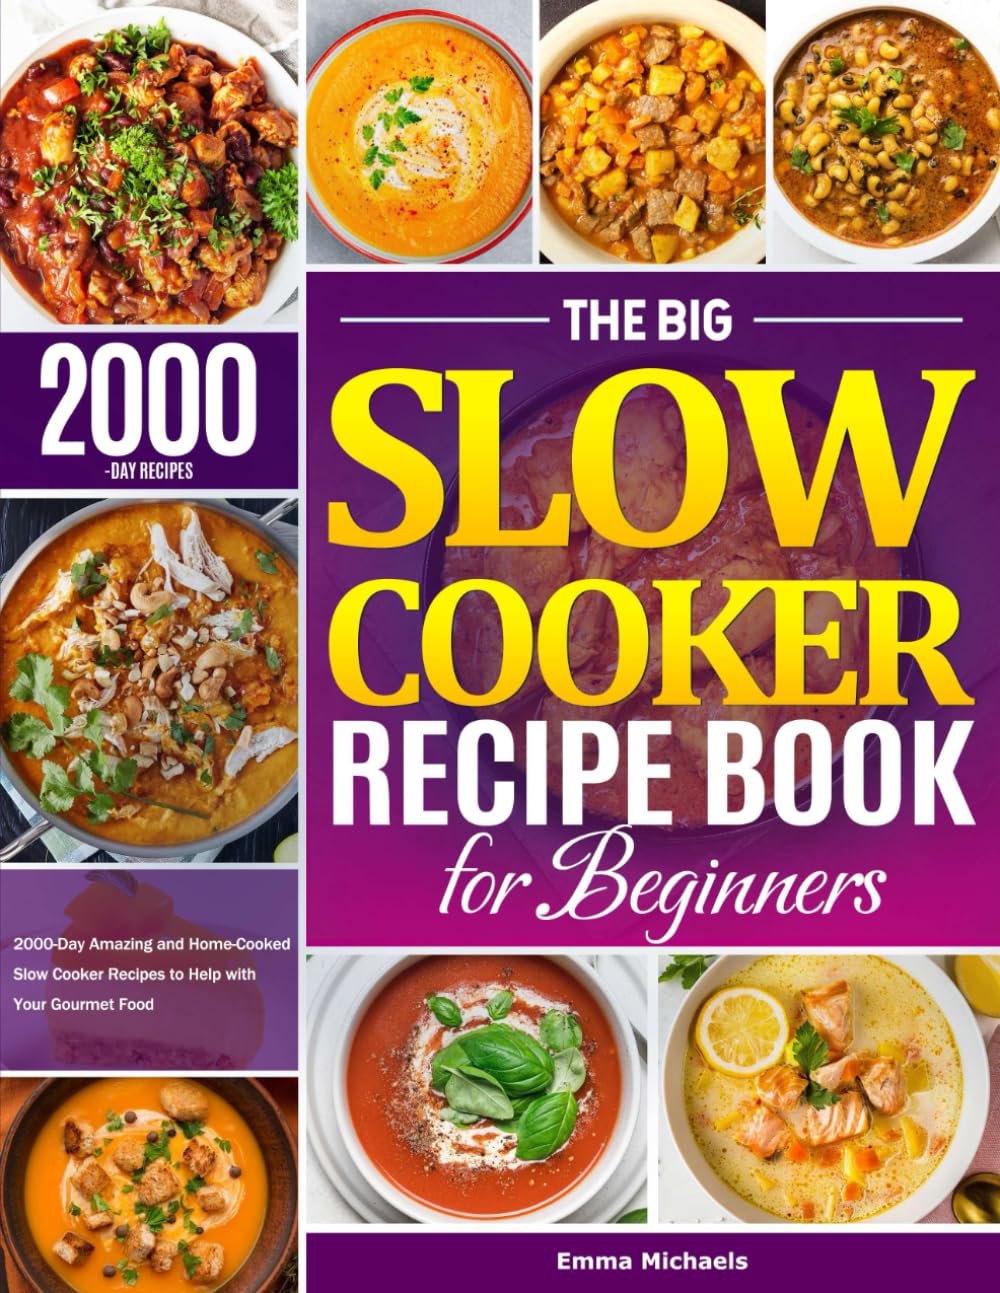 The Big Slow Cooker Recipe Book for Beginners Review